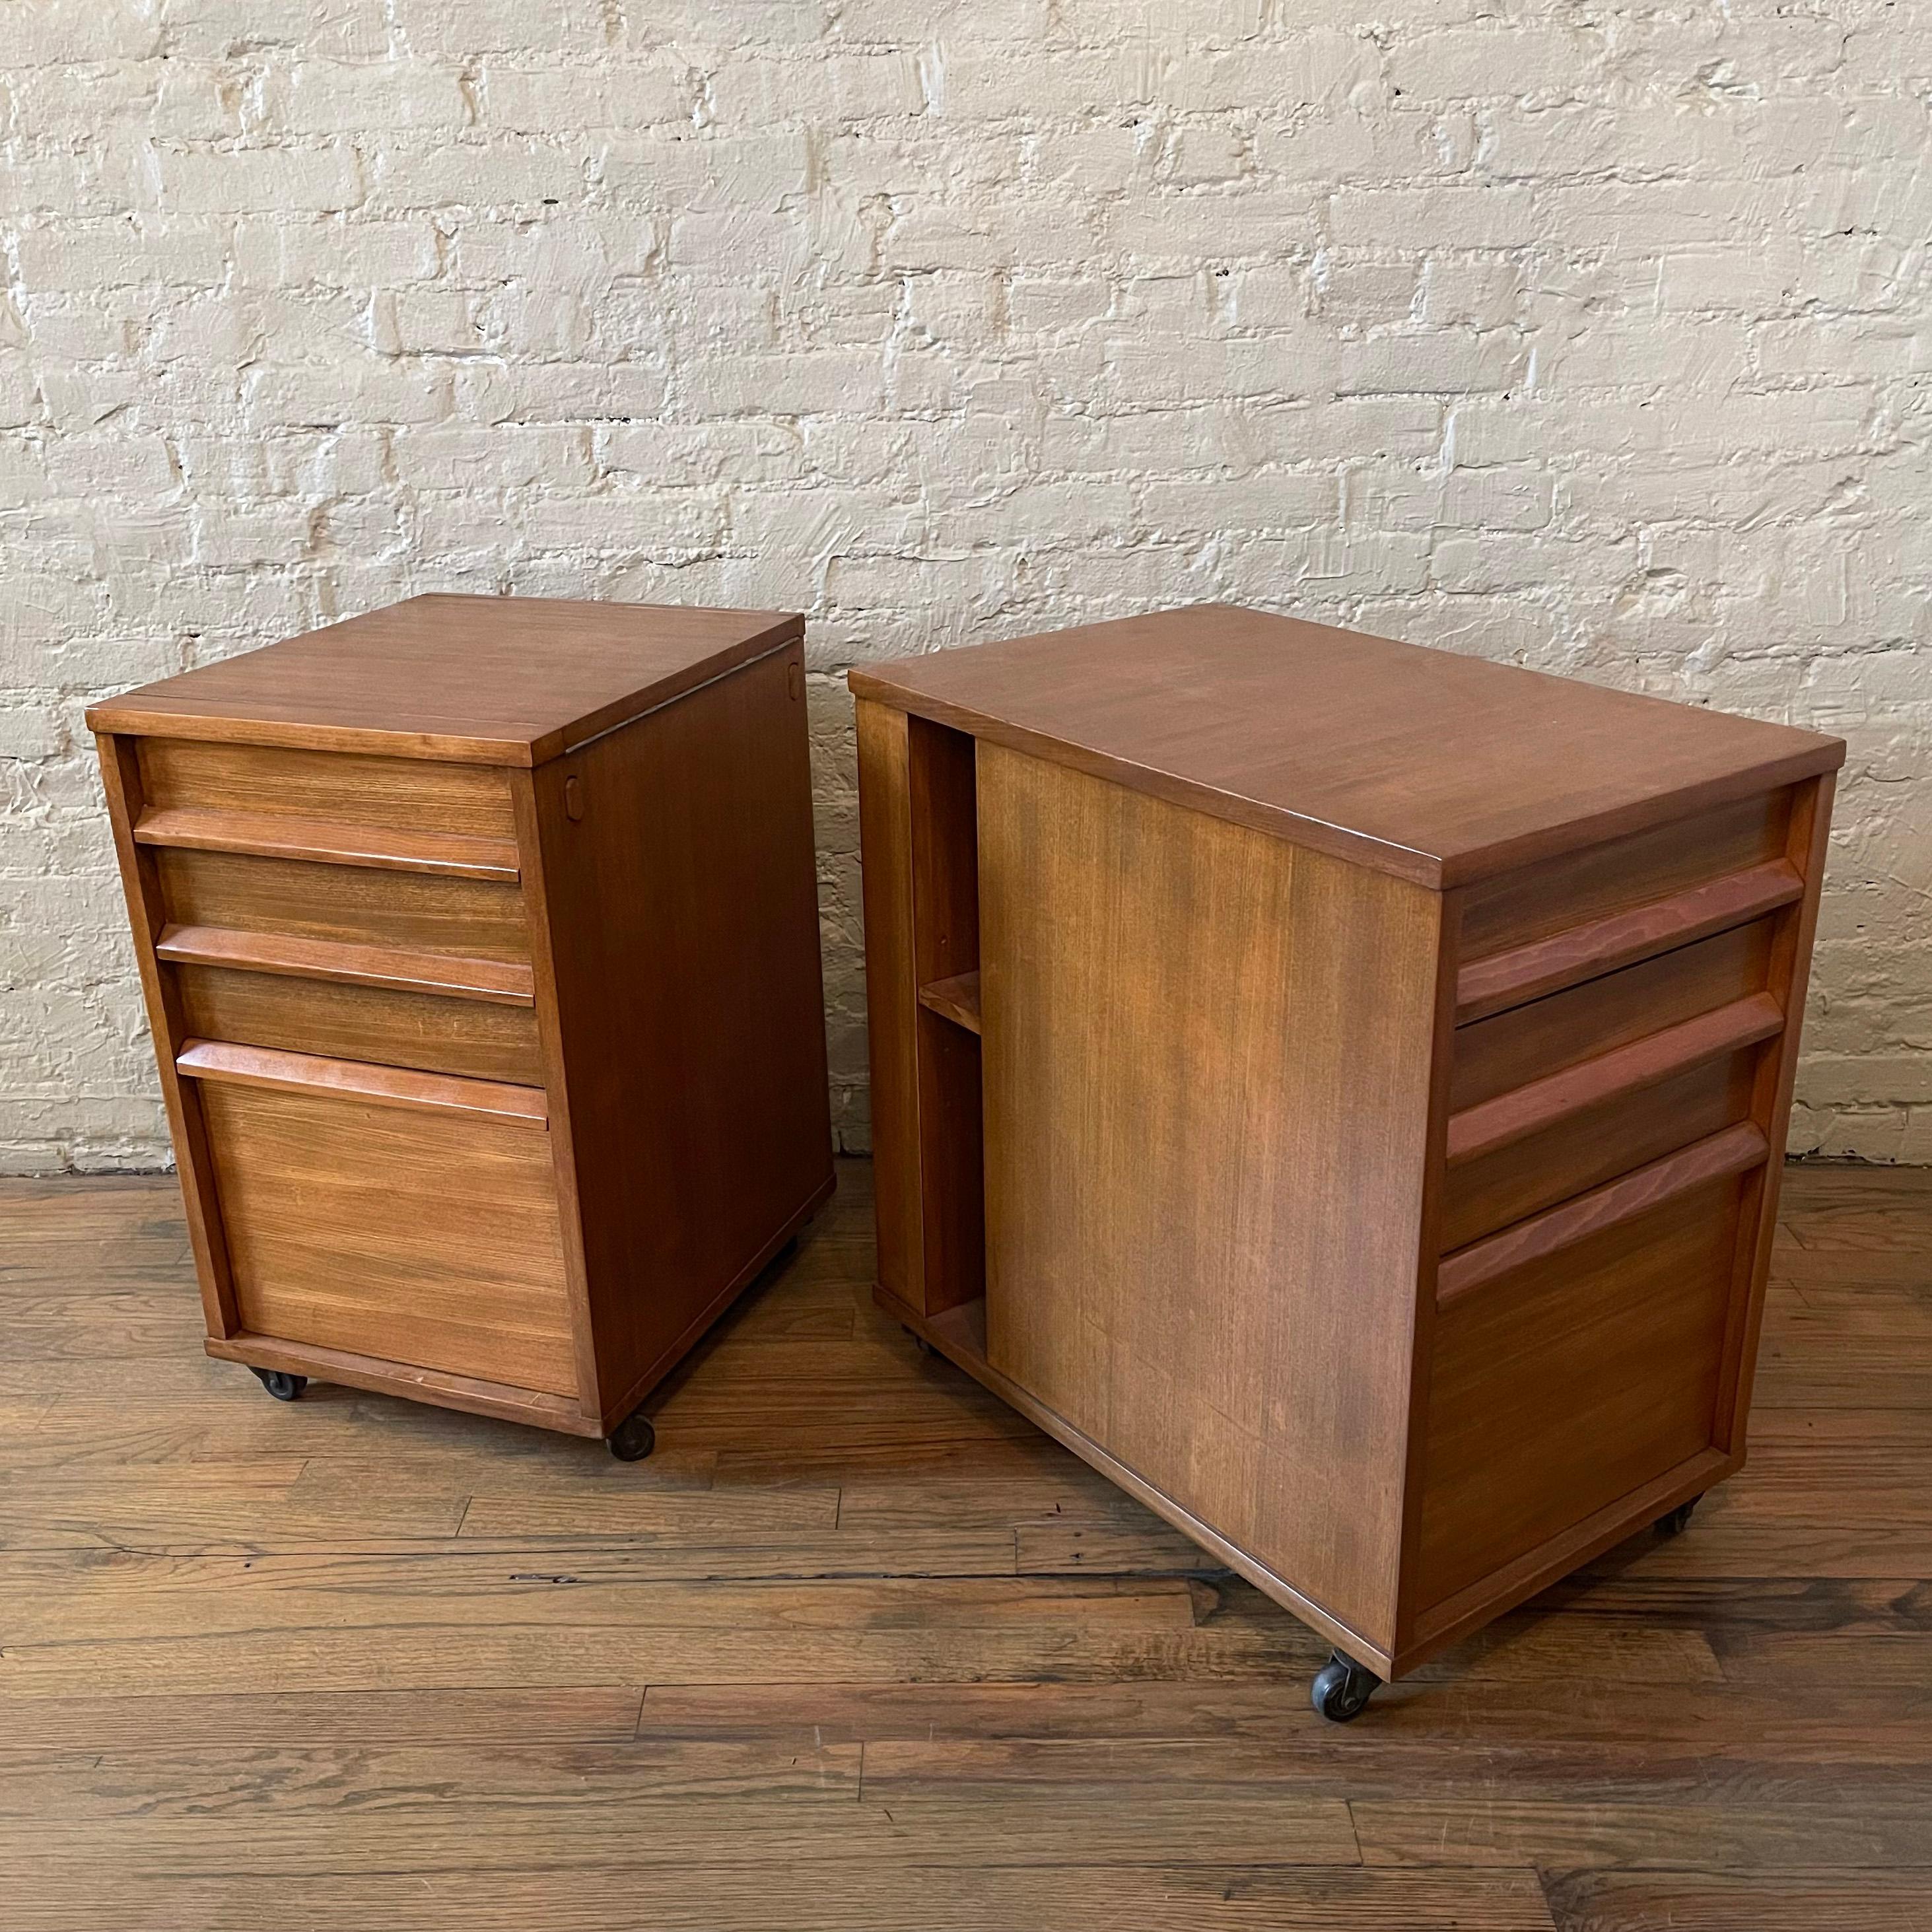 Pair of handsome, walnut, office, filing cabinets by Edward Wormley for Drexel roll on casters with front and top loading, drawer and hanging file storage. One cabinet is shallower at 18.5 inches depth.